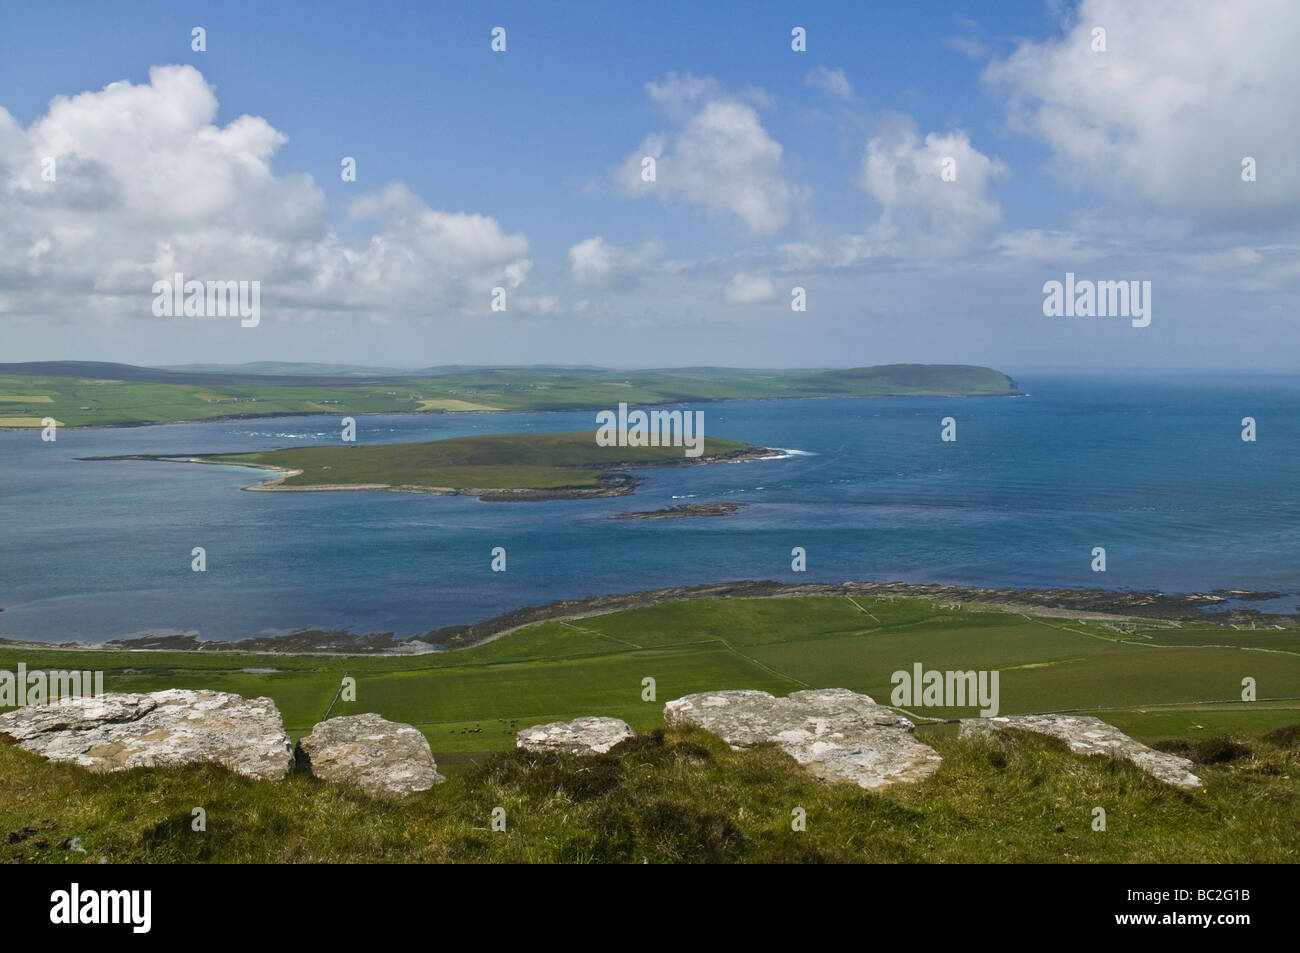 Dh Eynhallow sonido Eynhallow ROUSAY ORKNEY Island y Evie Orkney Westmainland hills sonidos viewpoint Foto de stock